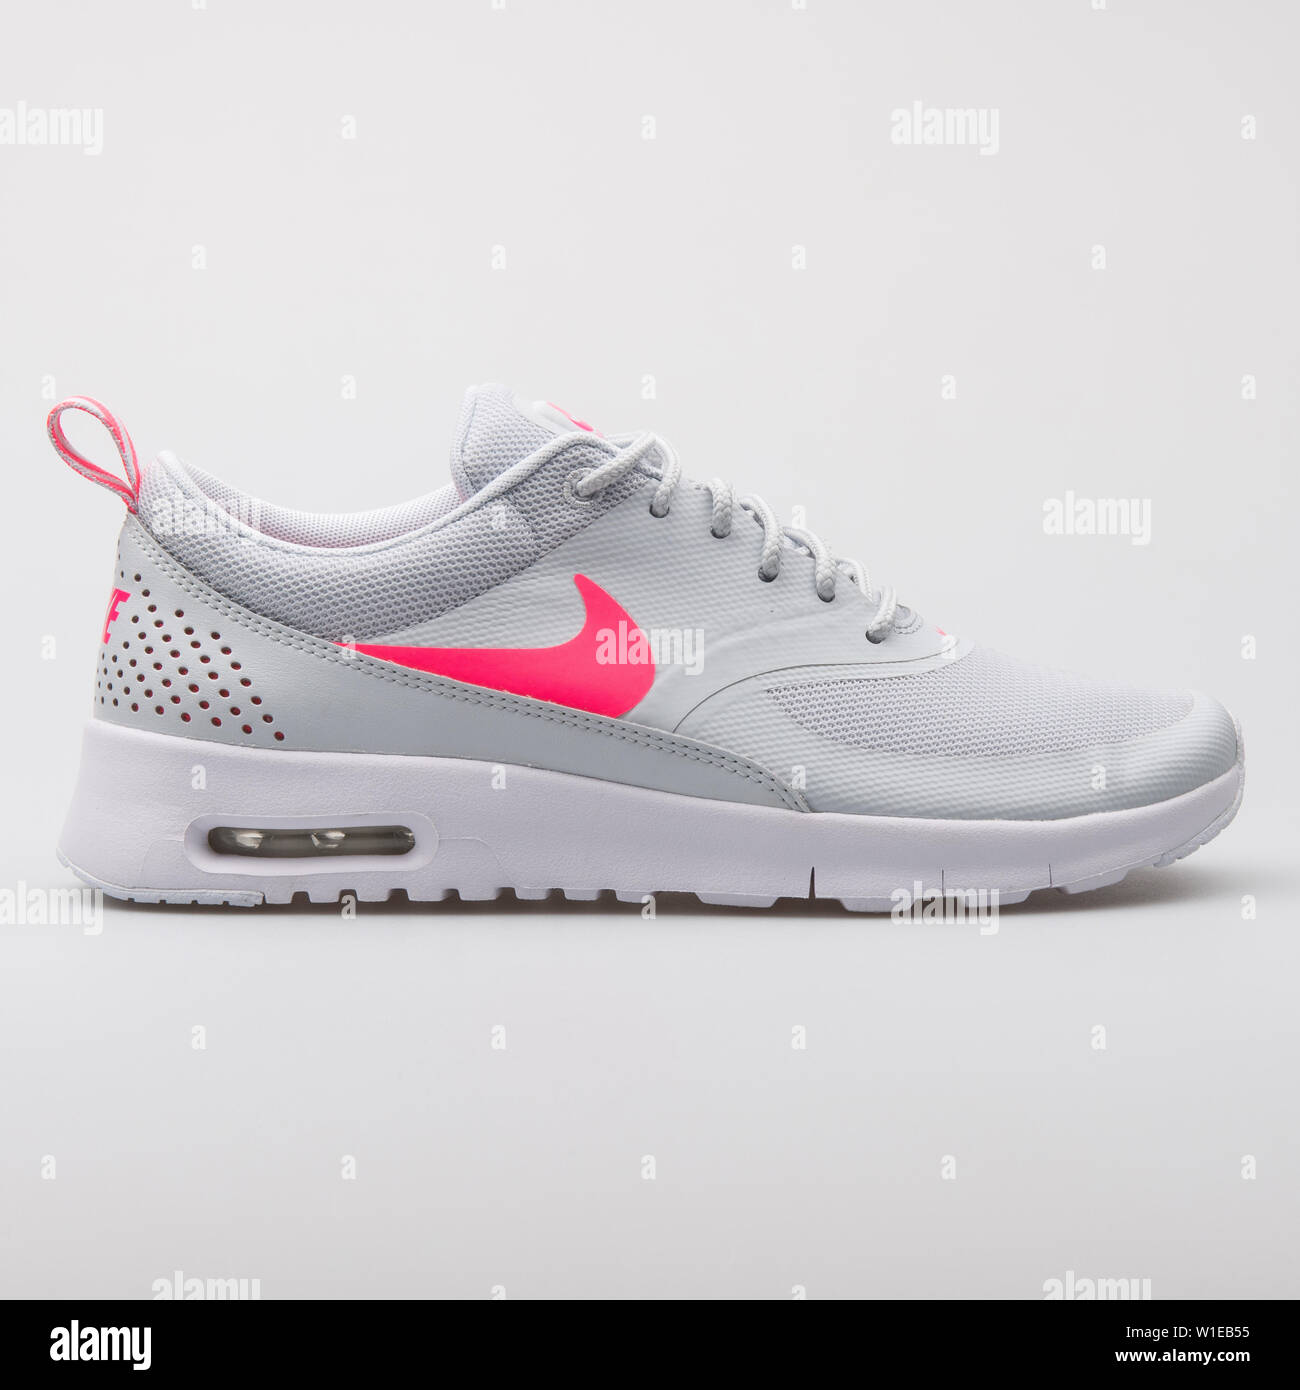 Nike Air Max Thea grey and pink sneaker 